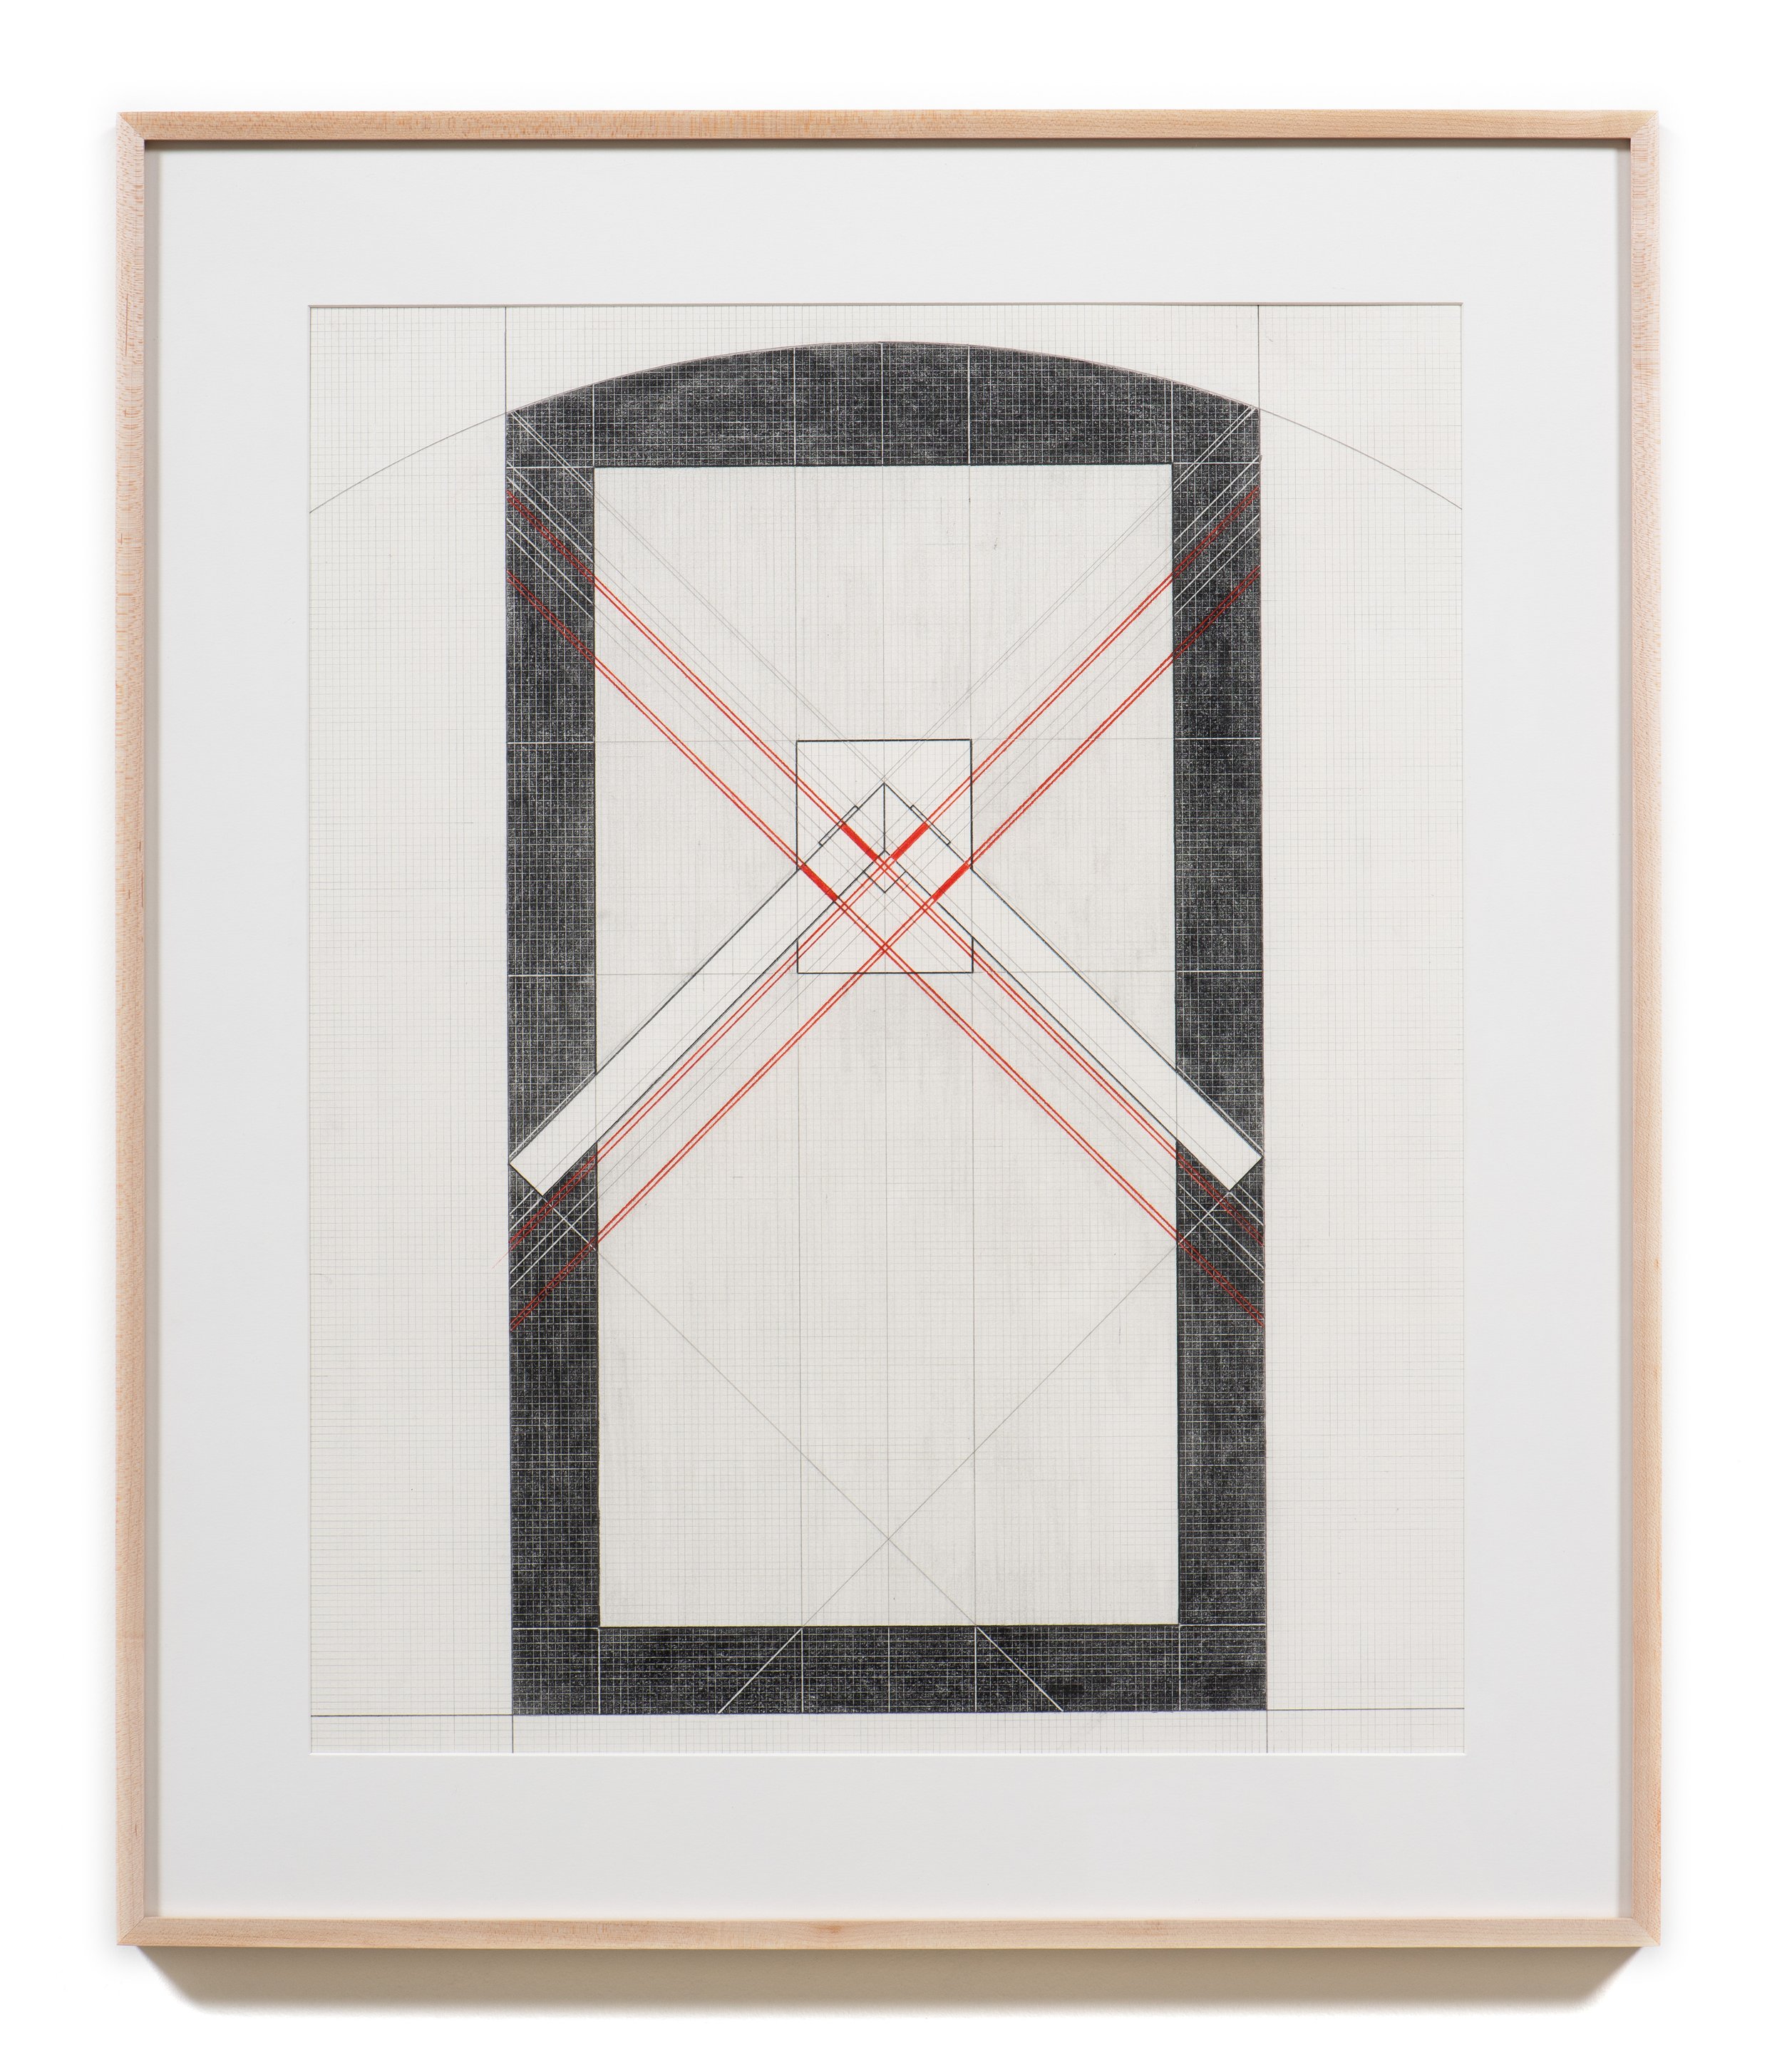   Monowatt 1 , 2021 Graphite and colored pencil on paper 36 x 31 x 1 1/2 inches (framed) 